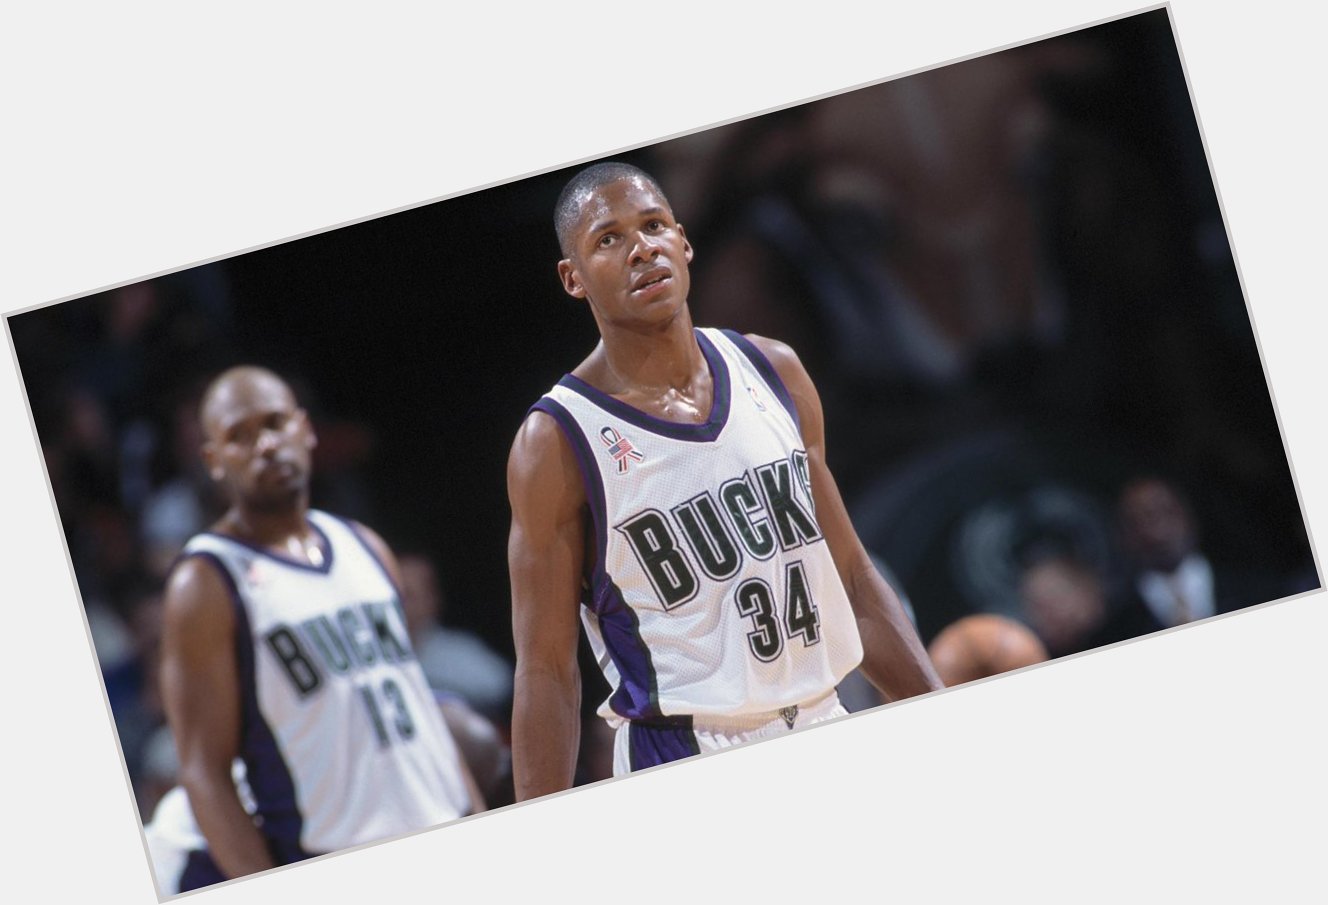 Happy Birthday, Ray Allen! Celebrate by taking a look back at his incredible career:

WATCH »  